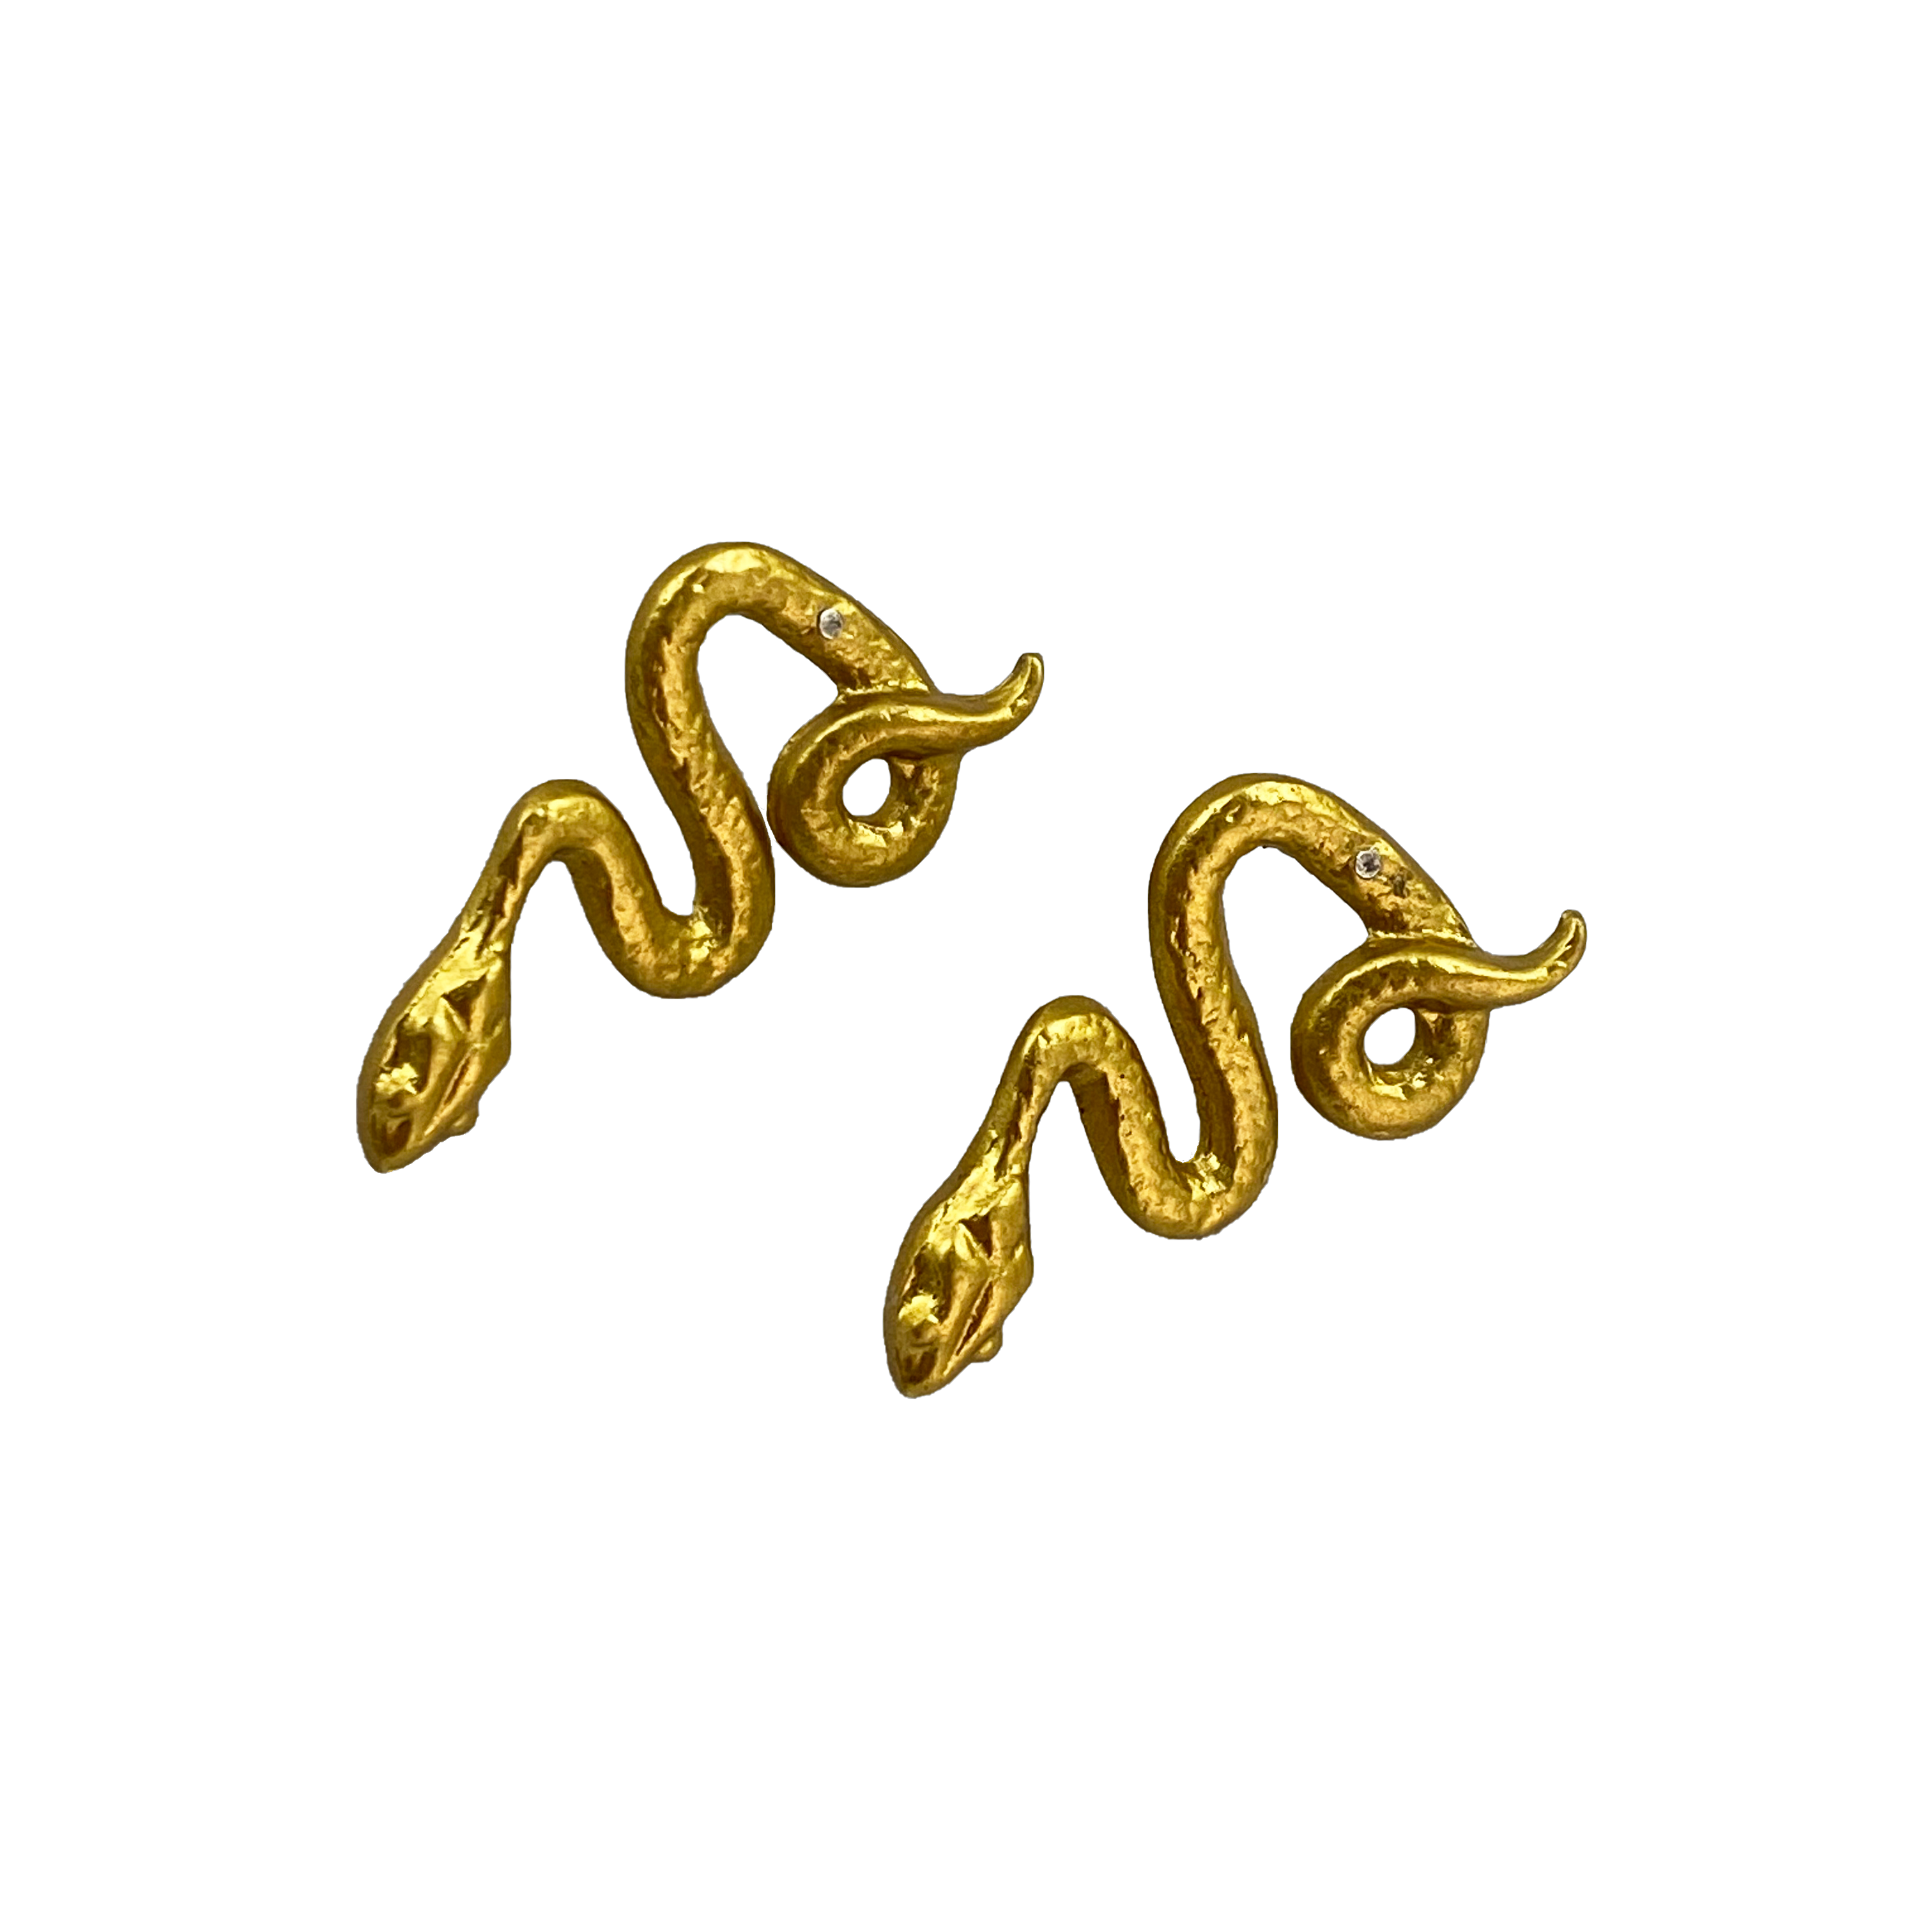 Elevate your style with Gold Tone Snake Earrings by Beatrix Ost. Symbolizing transformation, these statement pieces support Laotian artisans and MAG's de-mining efforts. Shop now for a unique blend of style, symbolism, and social responsibility.